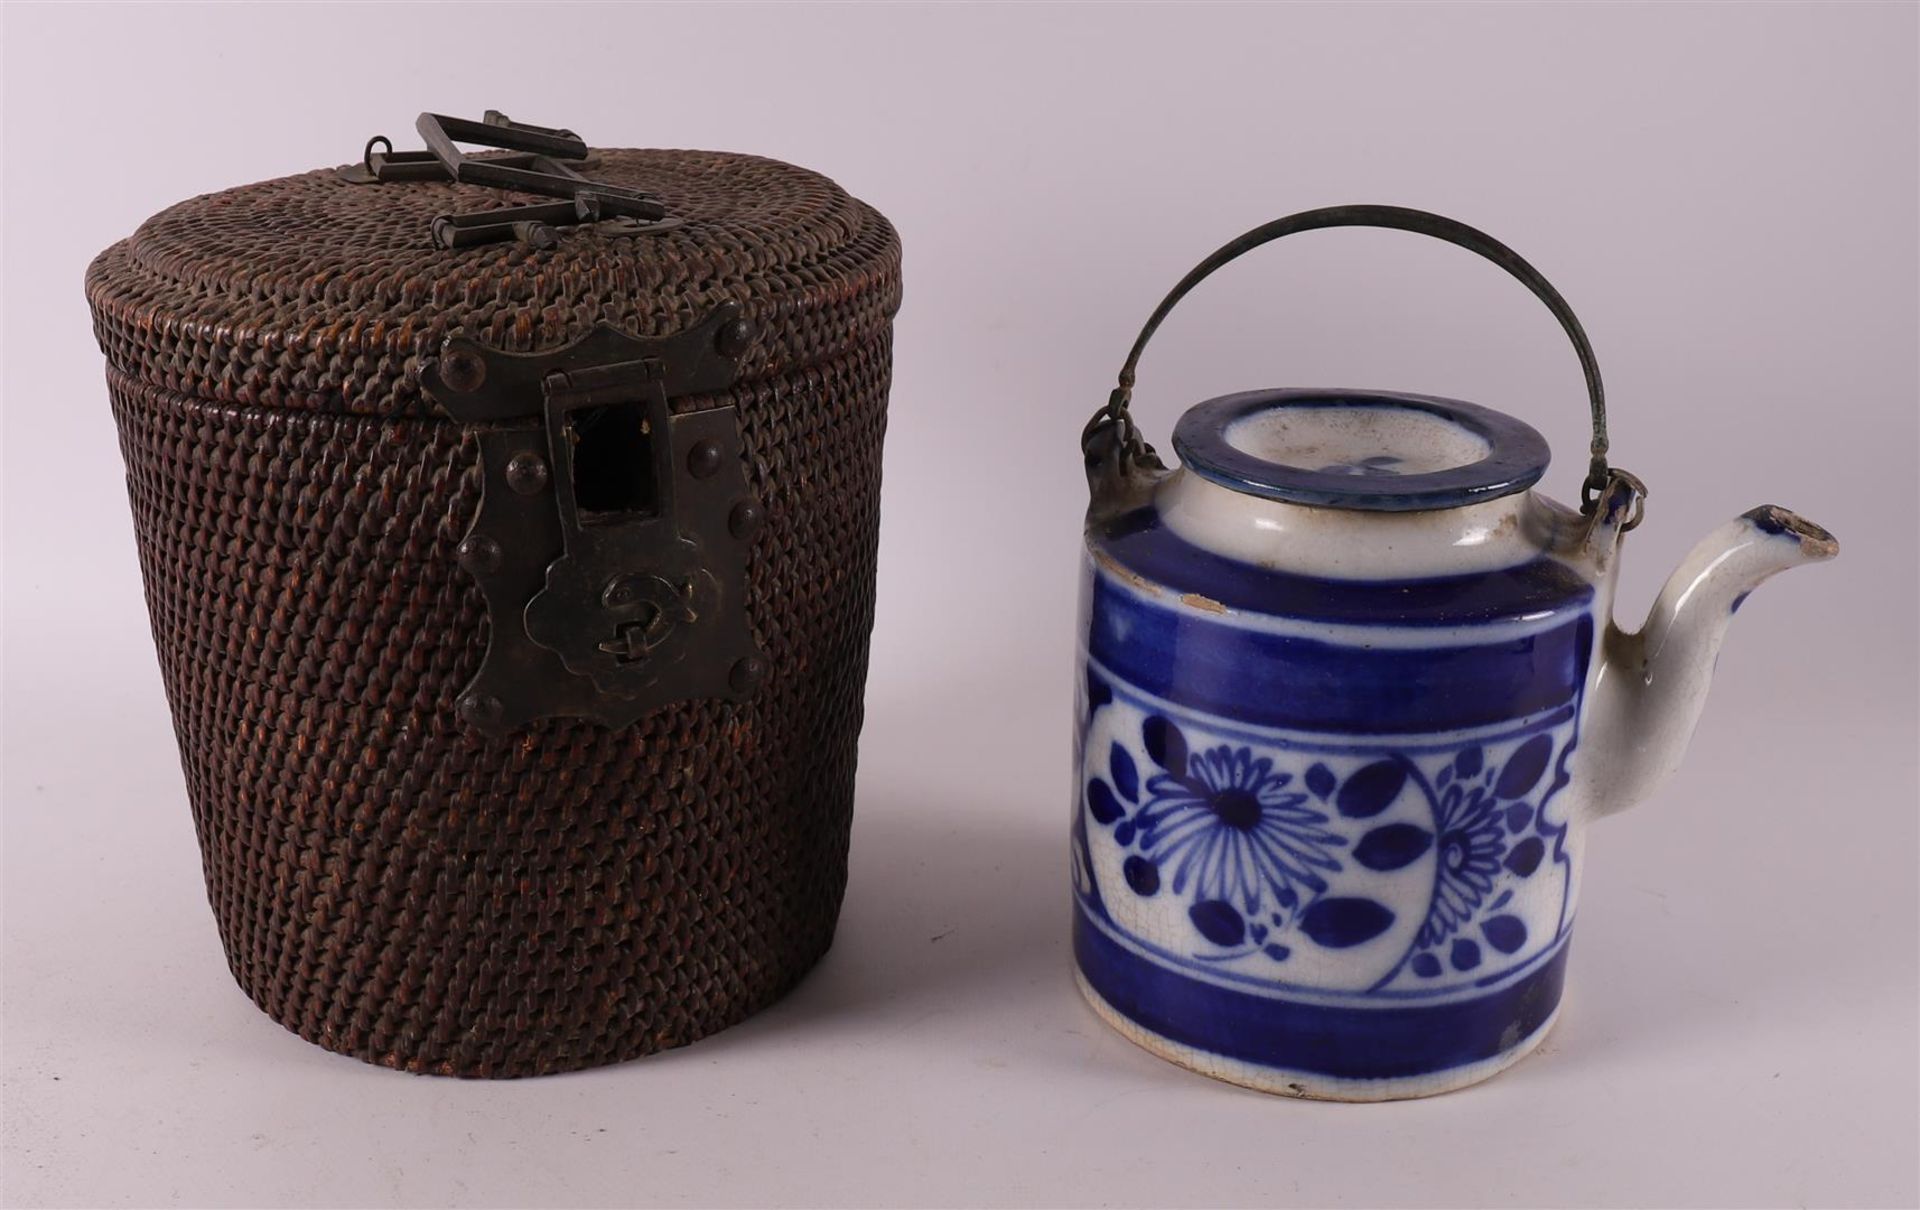 A blue/white porcelain teapot in a wicker case, China, around 1900.